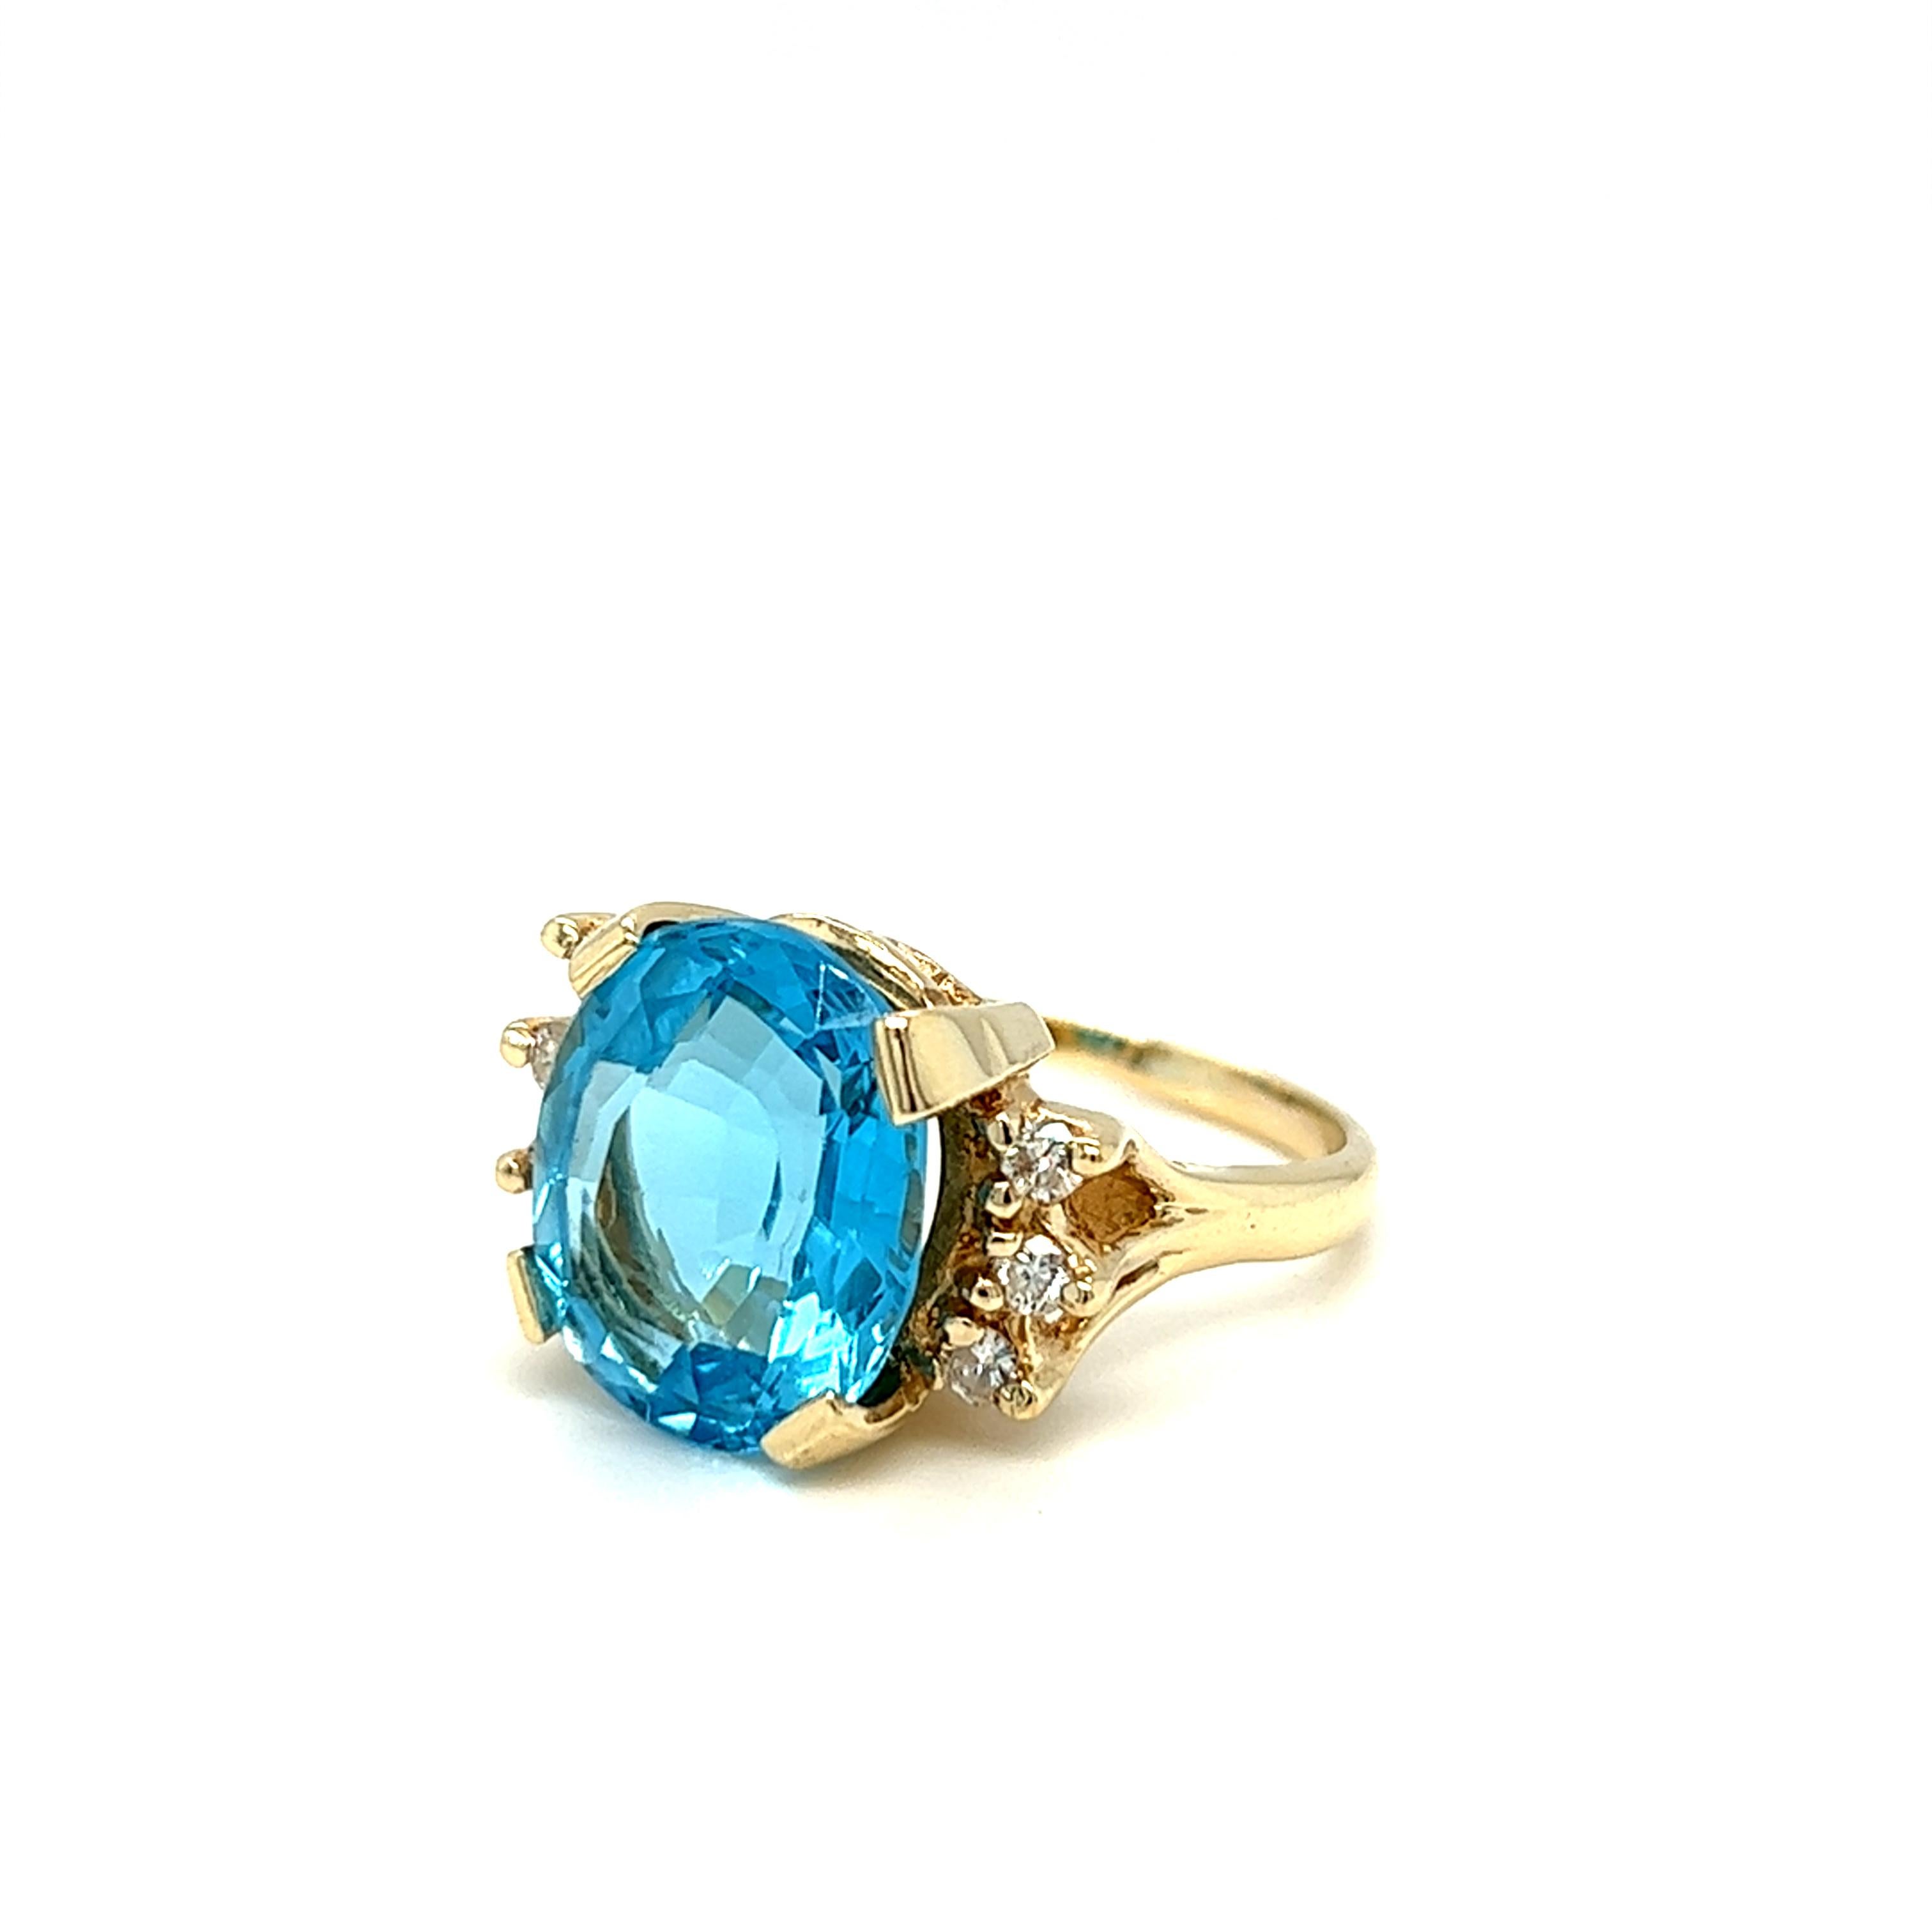 Vintage cocktail ring features a gorgeous oval shaped blue topaz at center, weighing approximately 11 carats. The center stone is held by four wide flat prongs and set in 14k yellow gold handmade setting split shoulders with branch like motif